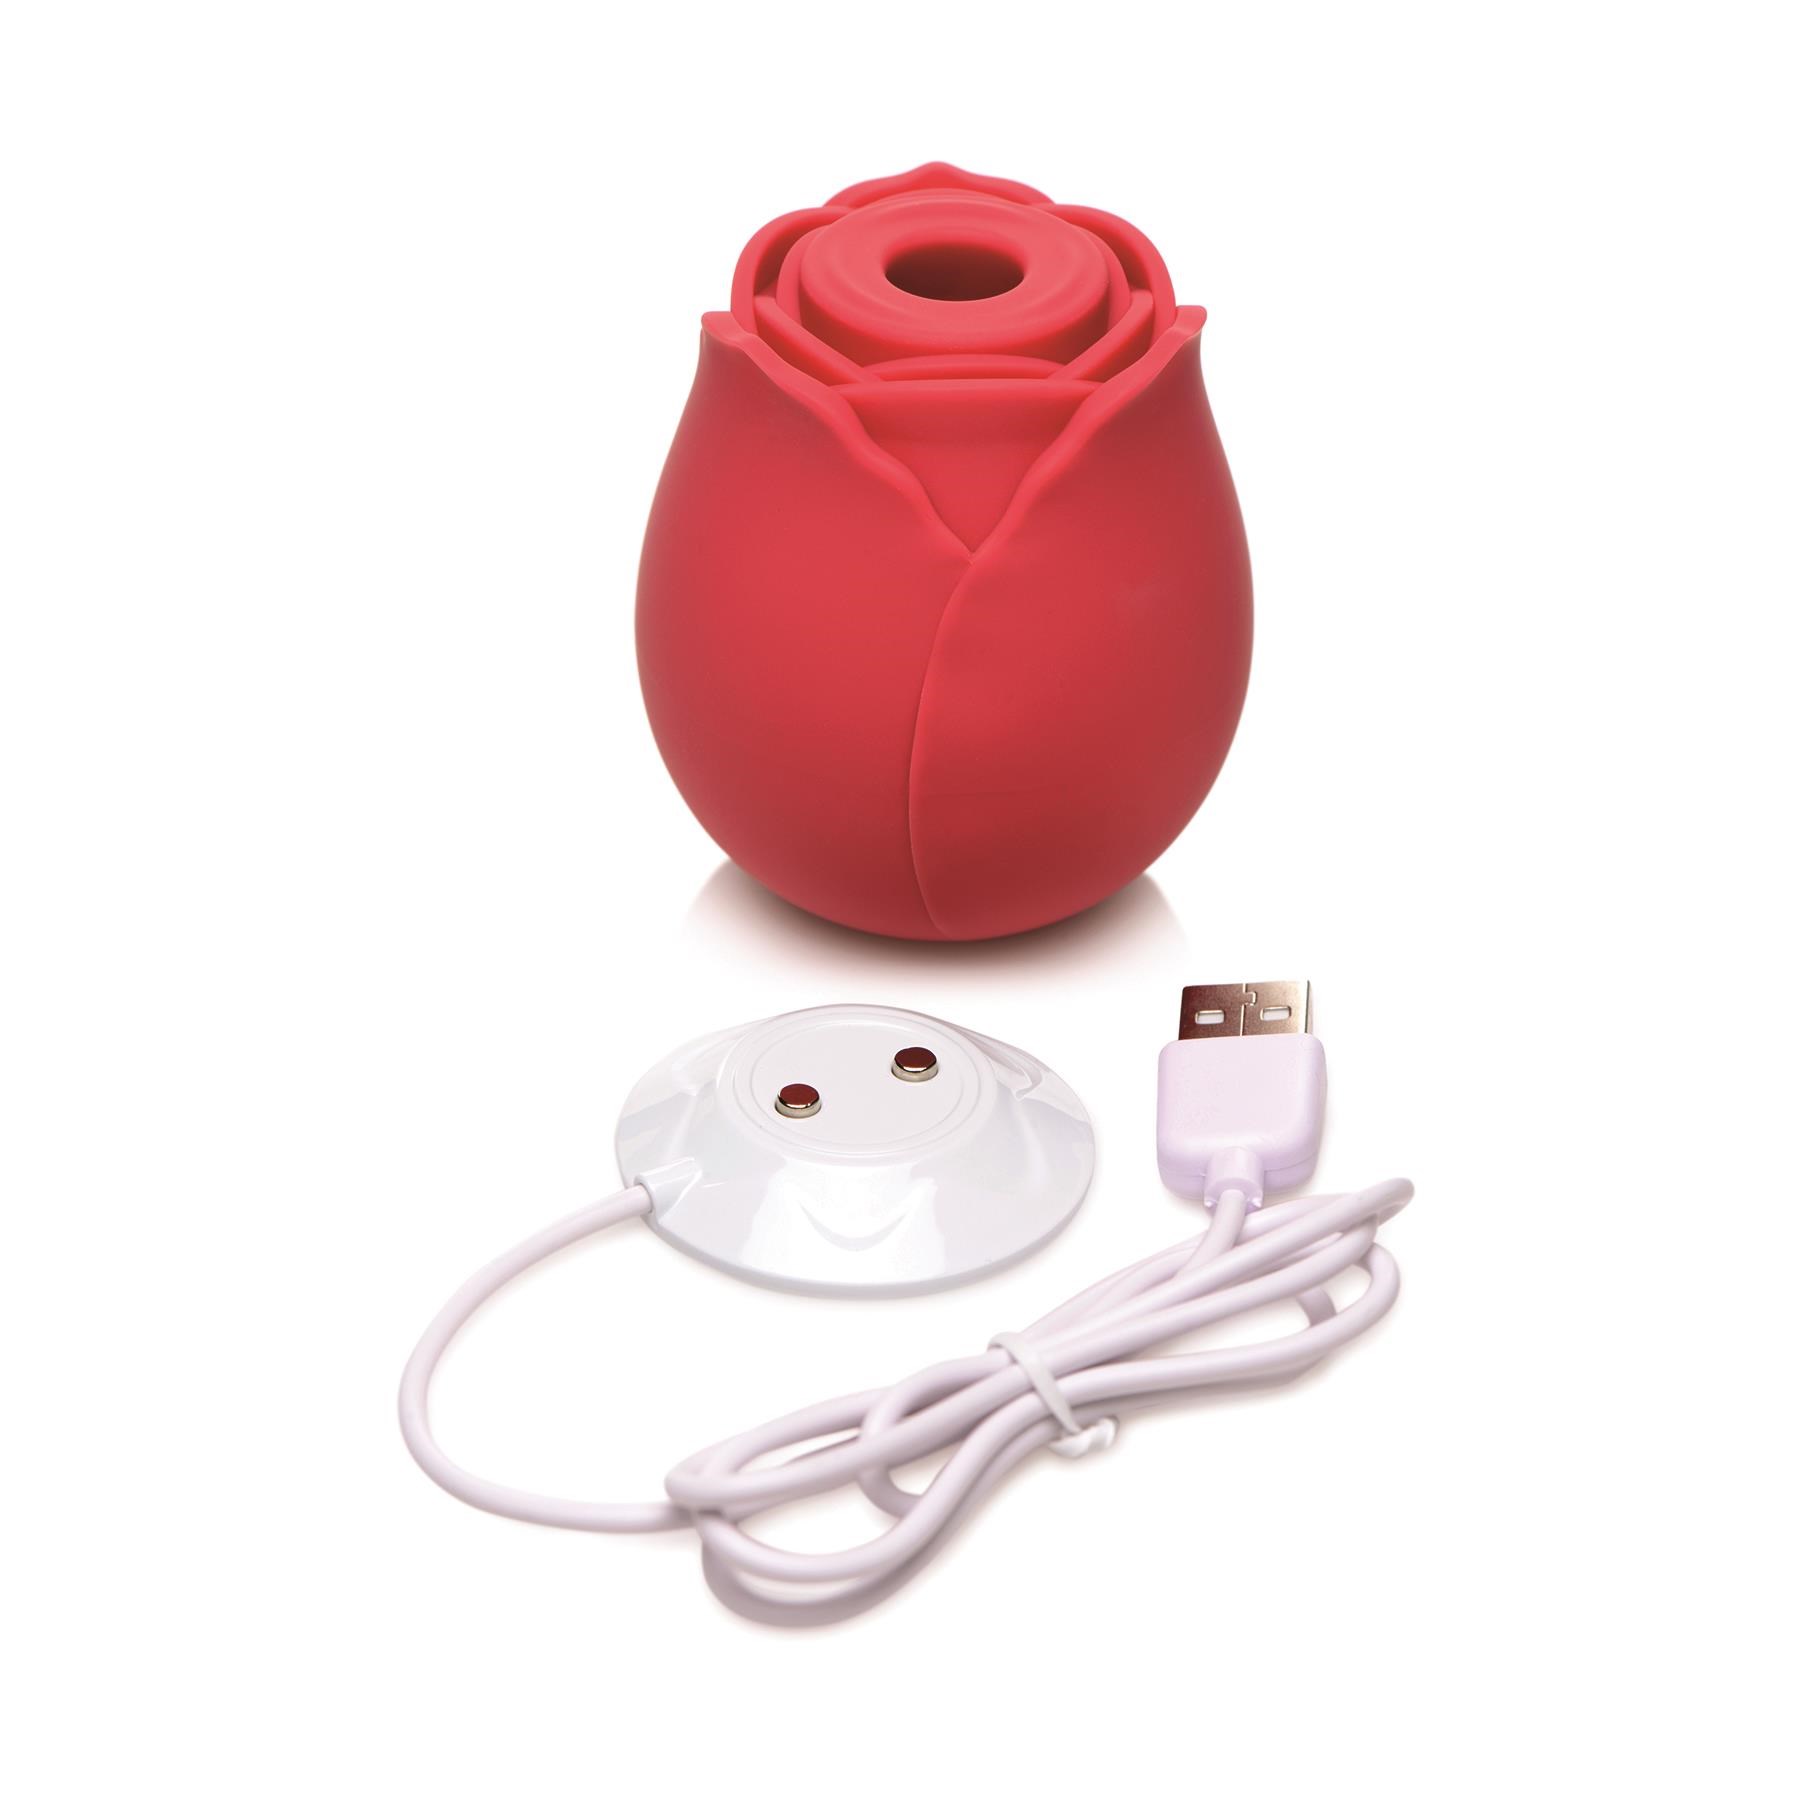 Bloomgasm Suction Rose Clitoral Stimulator With Charger - Red